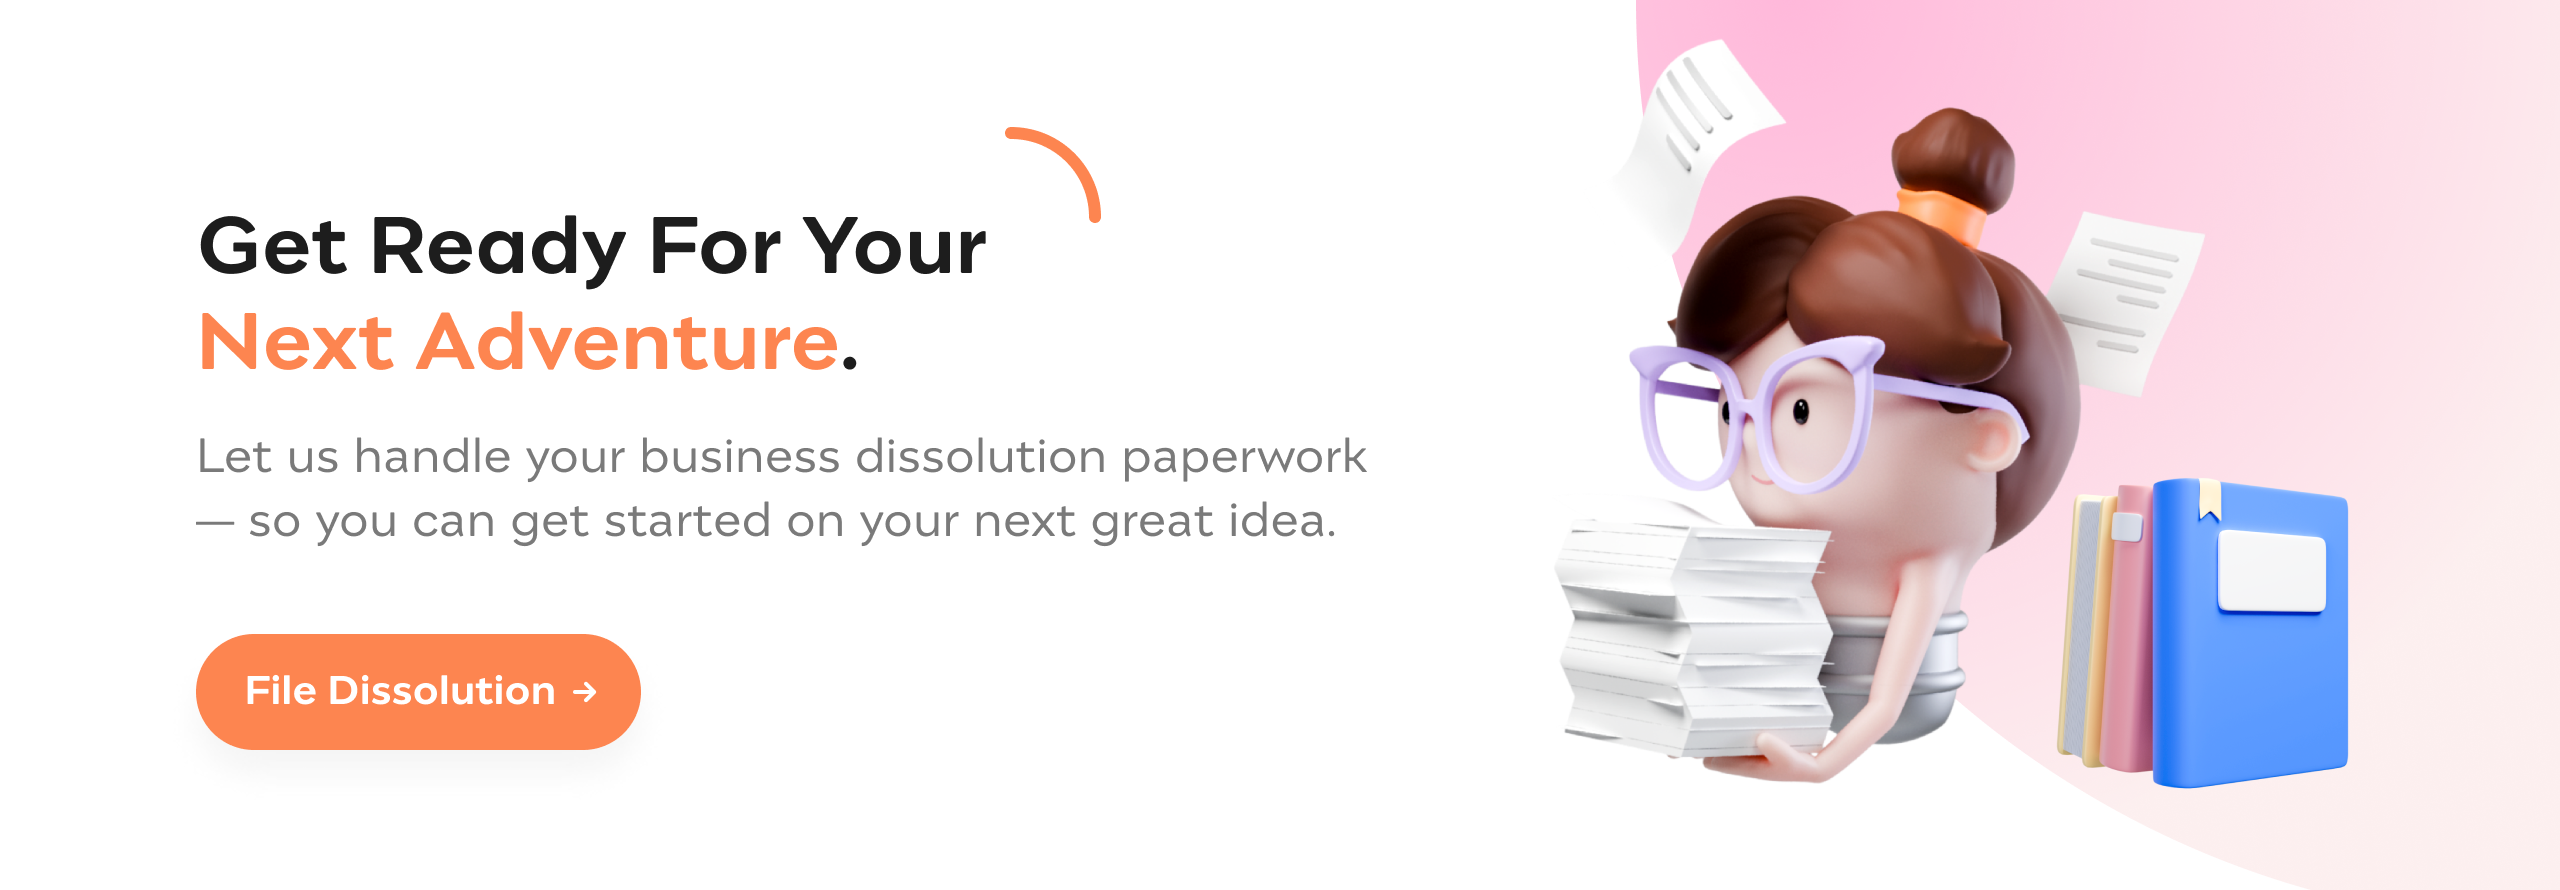 Text for filing a dissolution for your llc with incfile and an illustration of a lightbulb woman holding paperwork